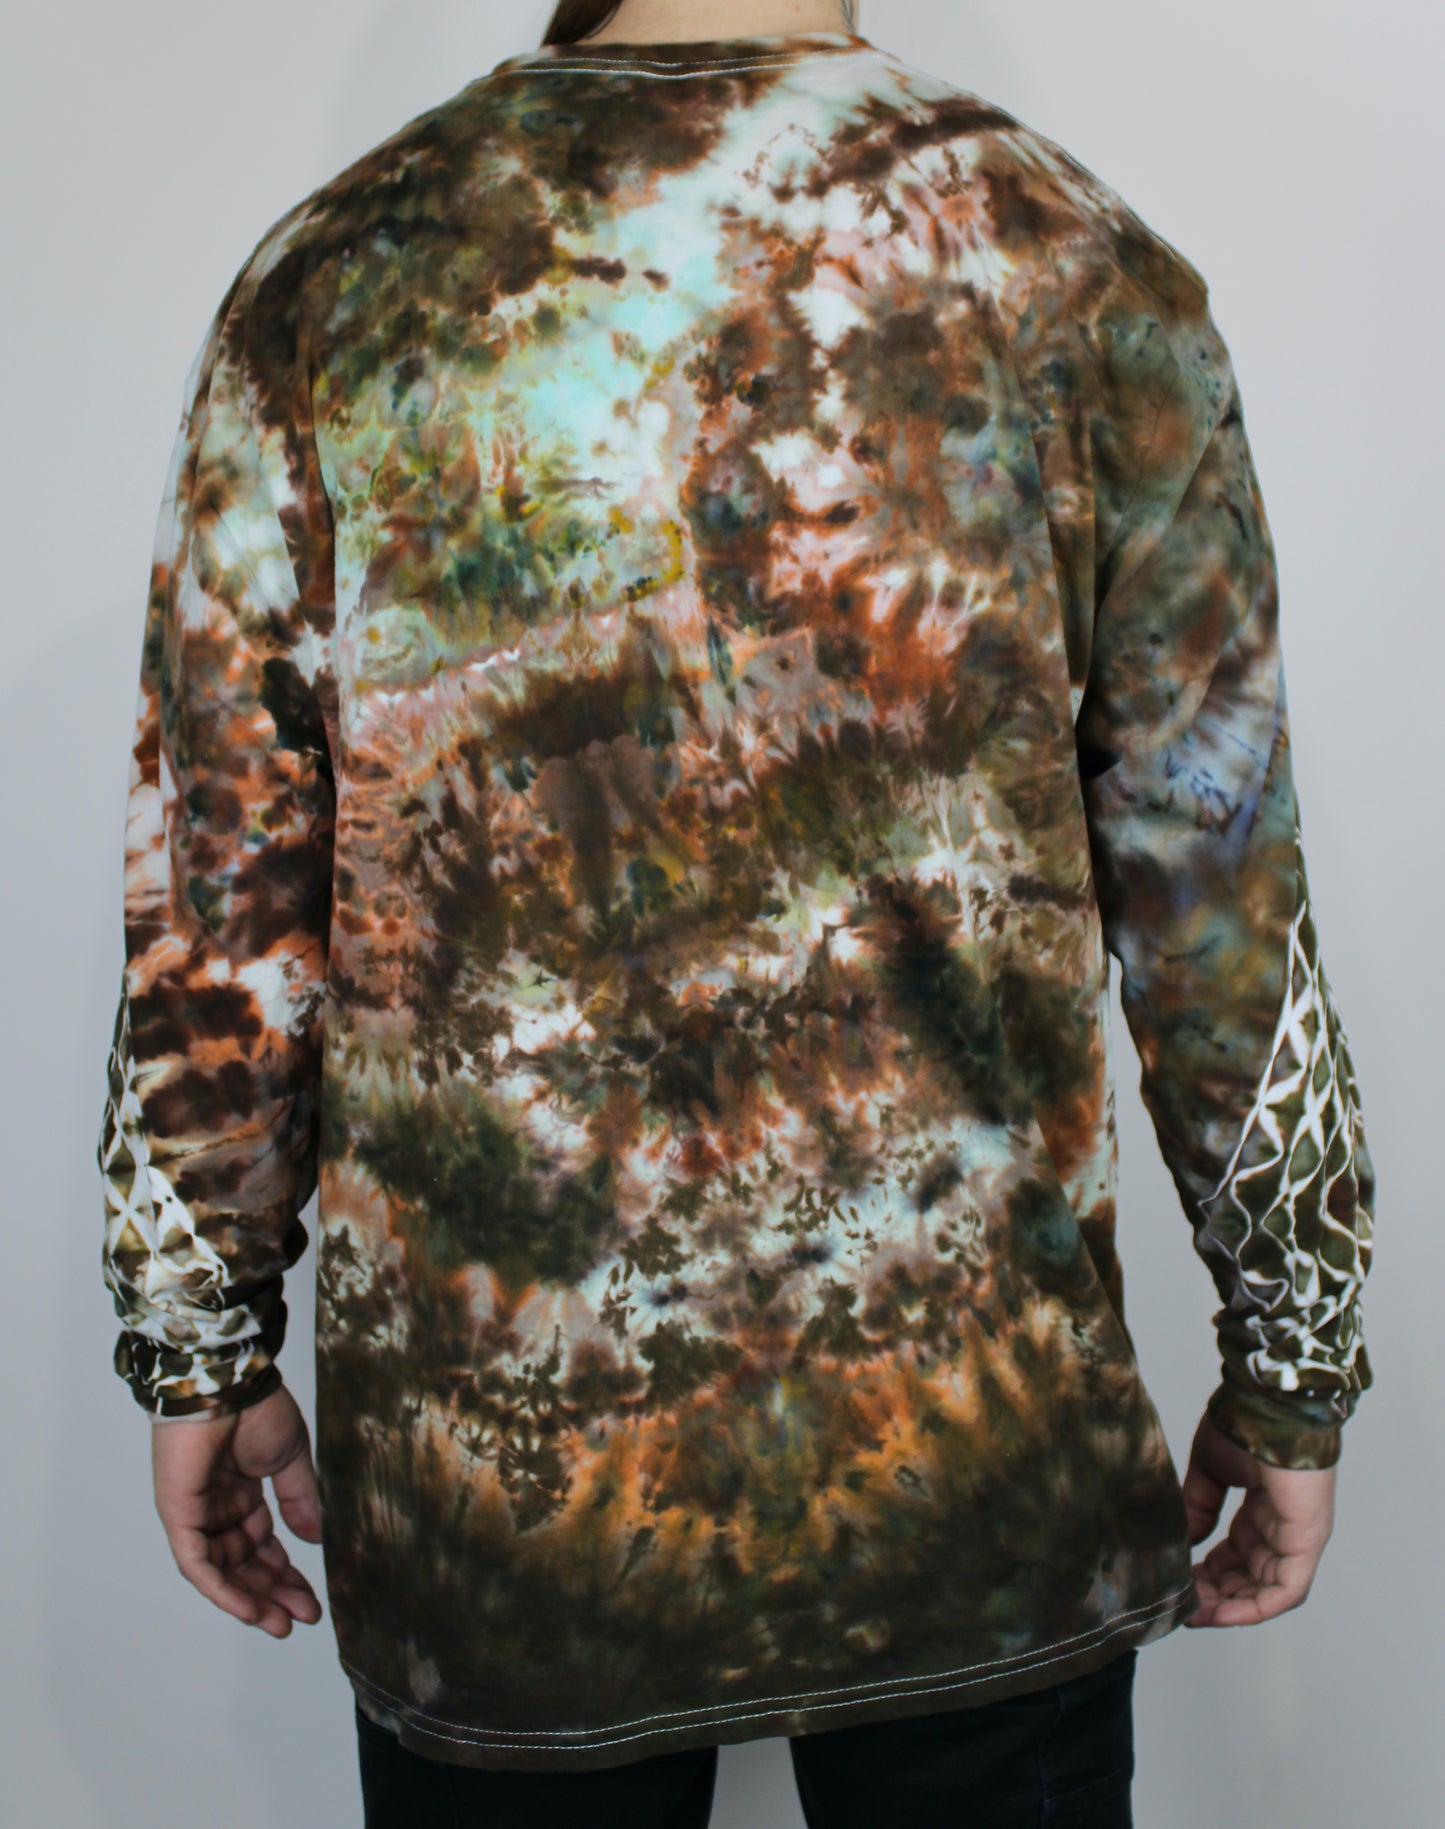 2XL - “Forest Forage” Long Sleeve Shirt